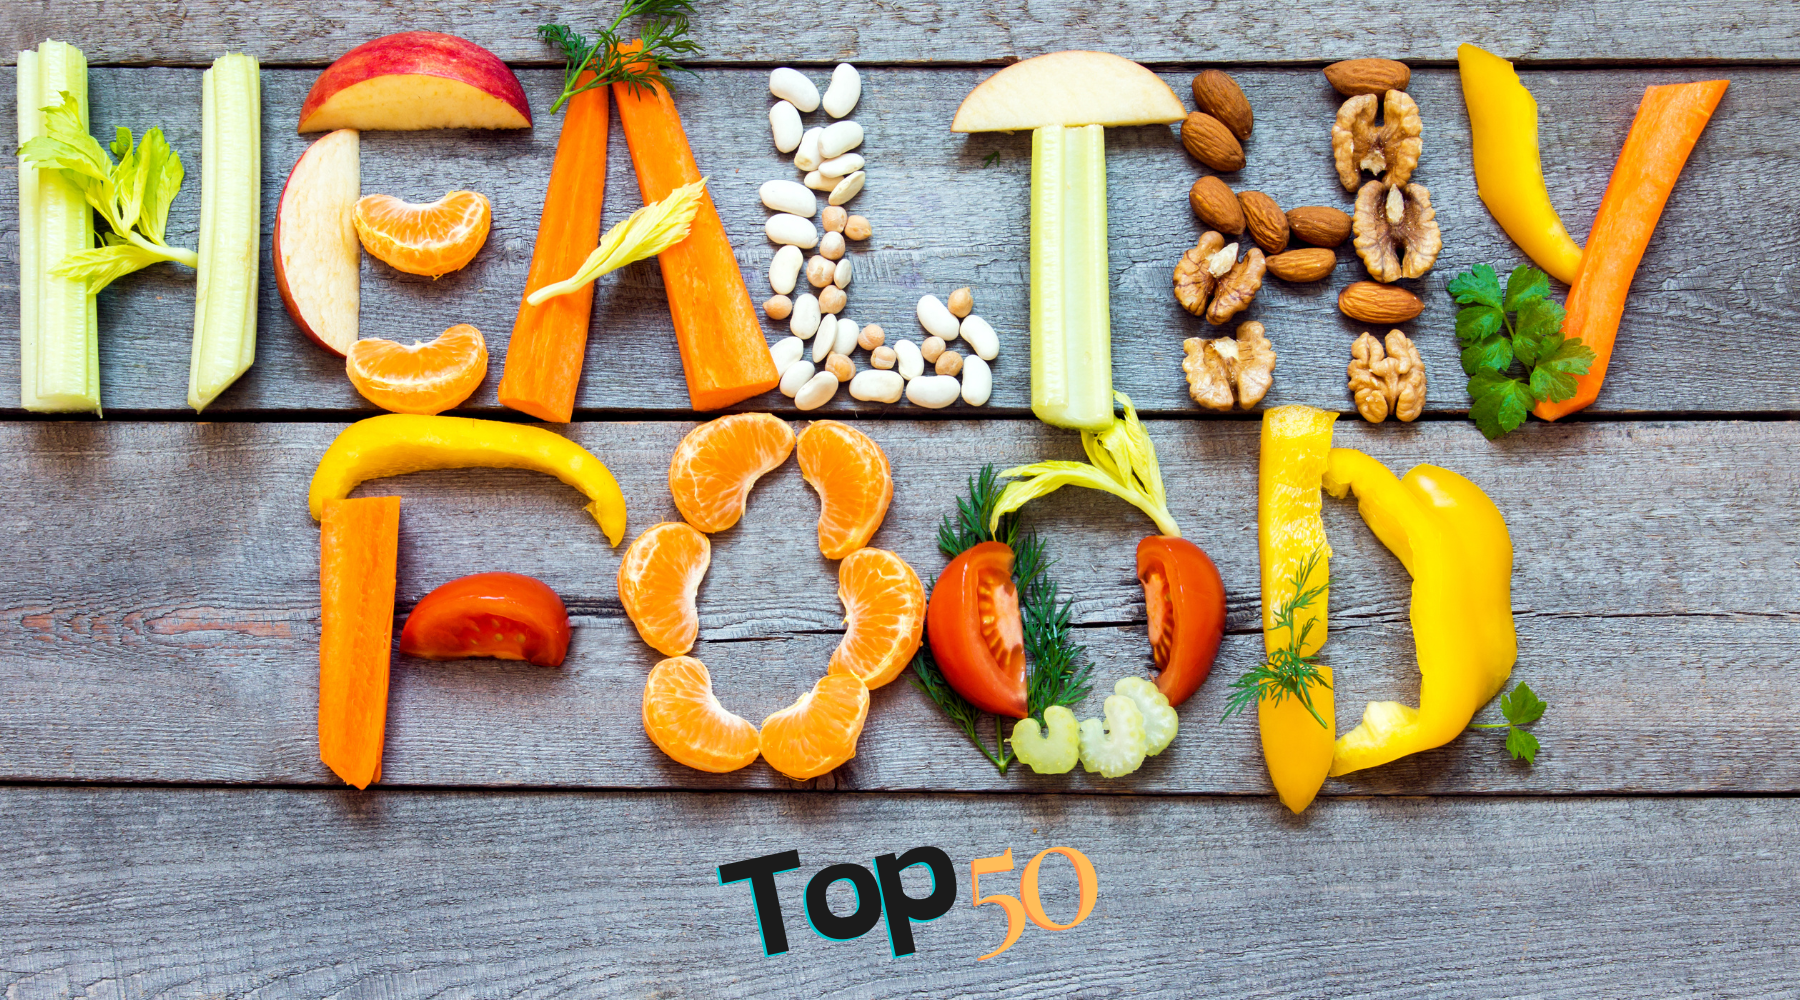 Top 50 Super Healthy Foods from All Categories to Include in Your Diet